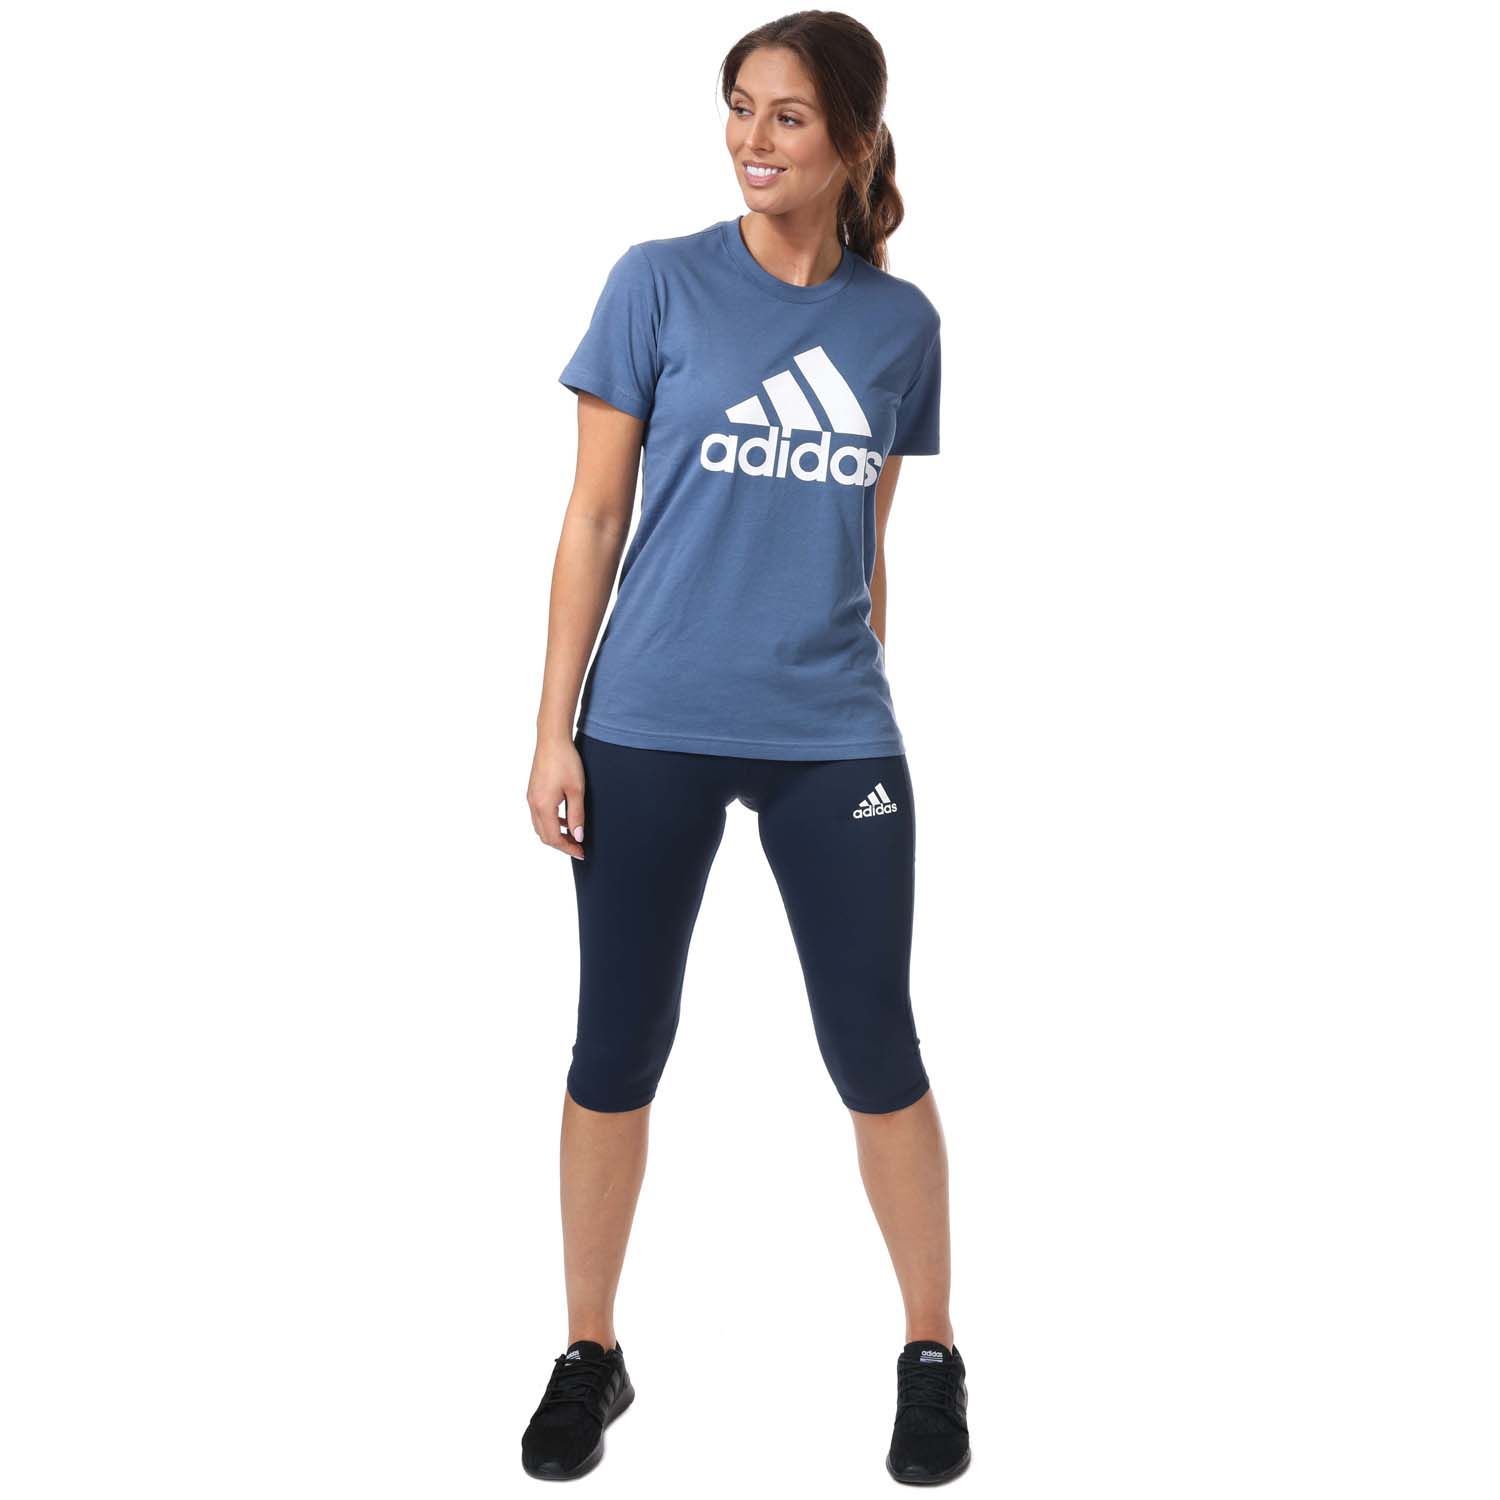 Womens adidas Alphaskin 3-4 Tights in indigo.- Wide elastic waistband.- Ventilated crotch gusset panel.- Climalite wicking system.- Center back.- Alphaskin compression.- adidas Badge of Sport logo screen printed on the leg.- Main Material: 85% Polyester (Recycled)  15% Elastane.  Machine washable. - Ref: FL9501